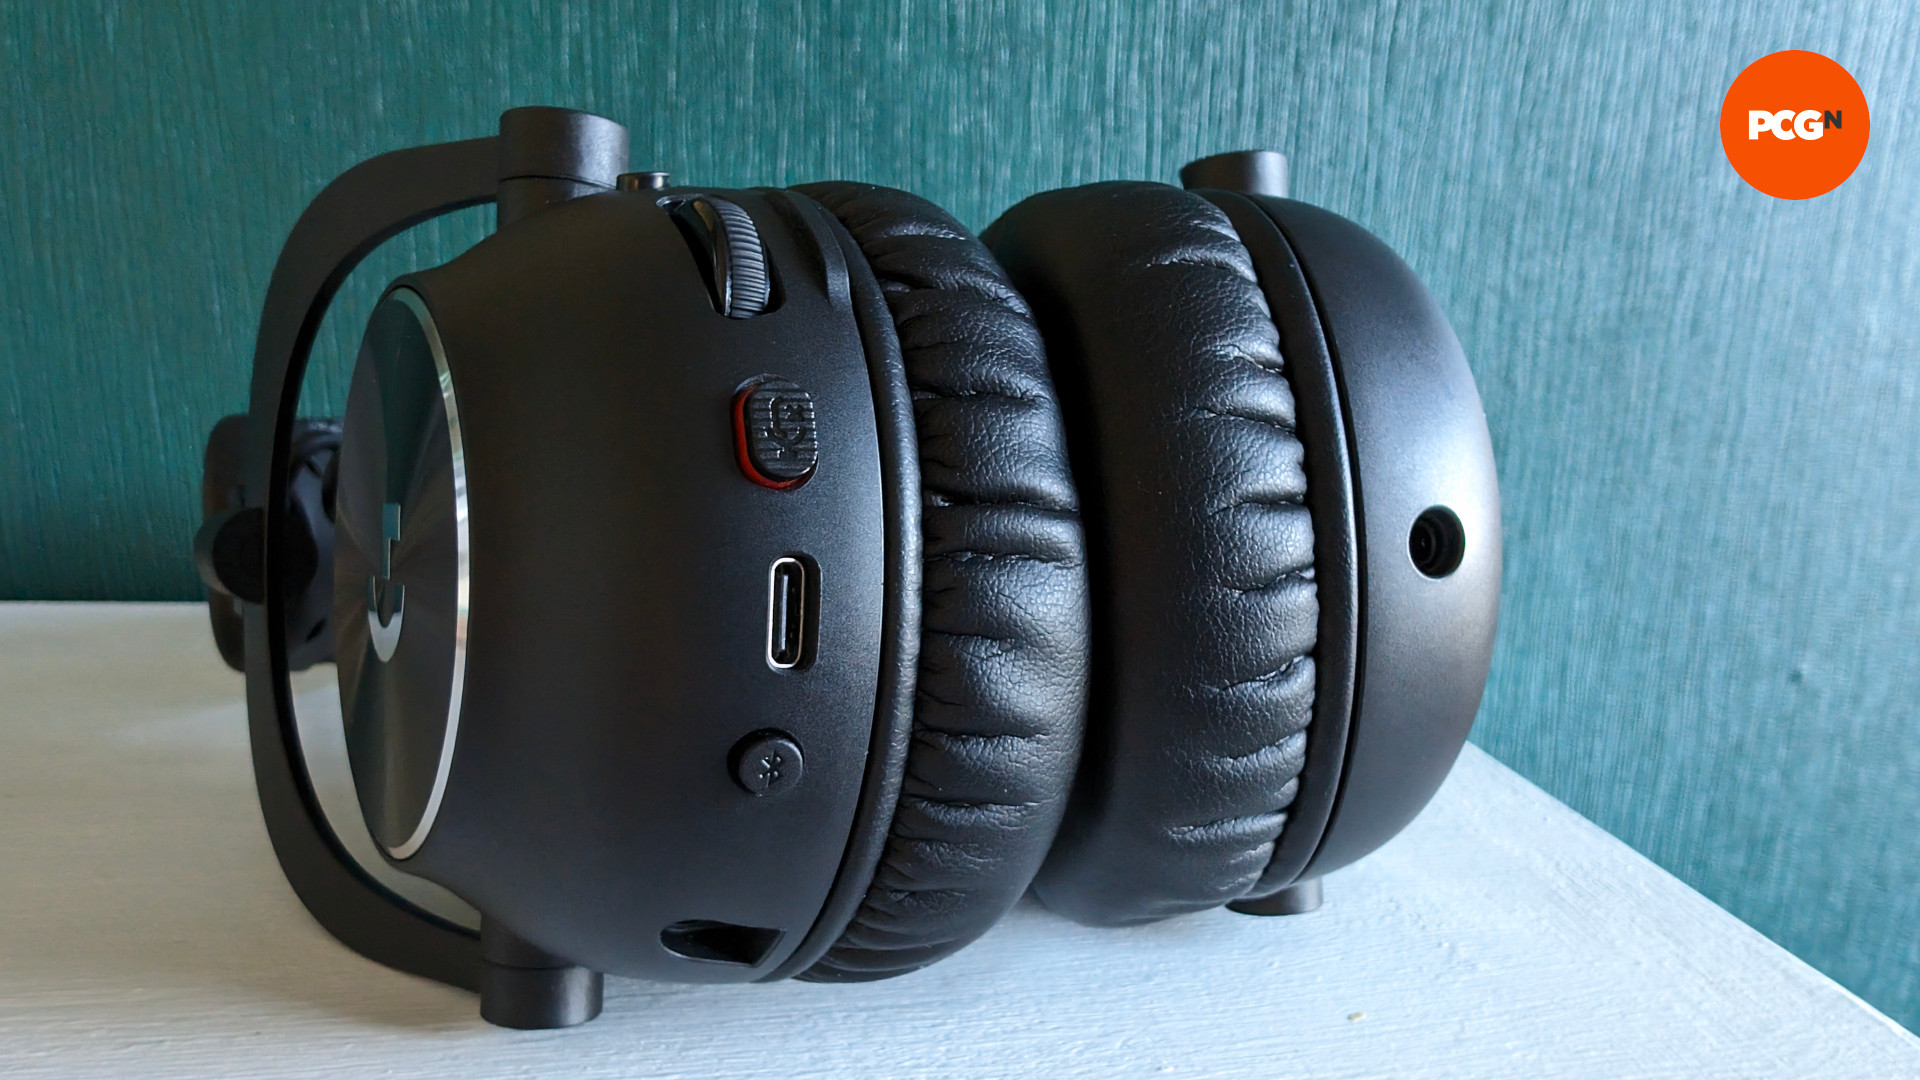 Logitech G Pro X 2 review: A truly excellent PC gaming headset